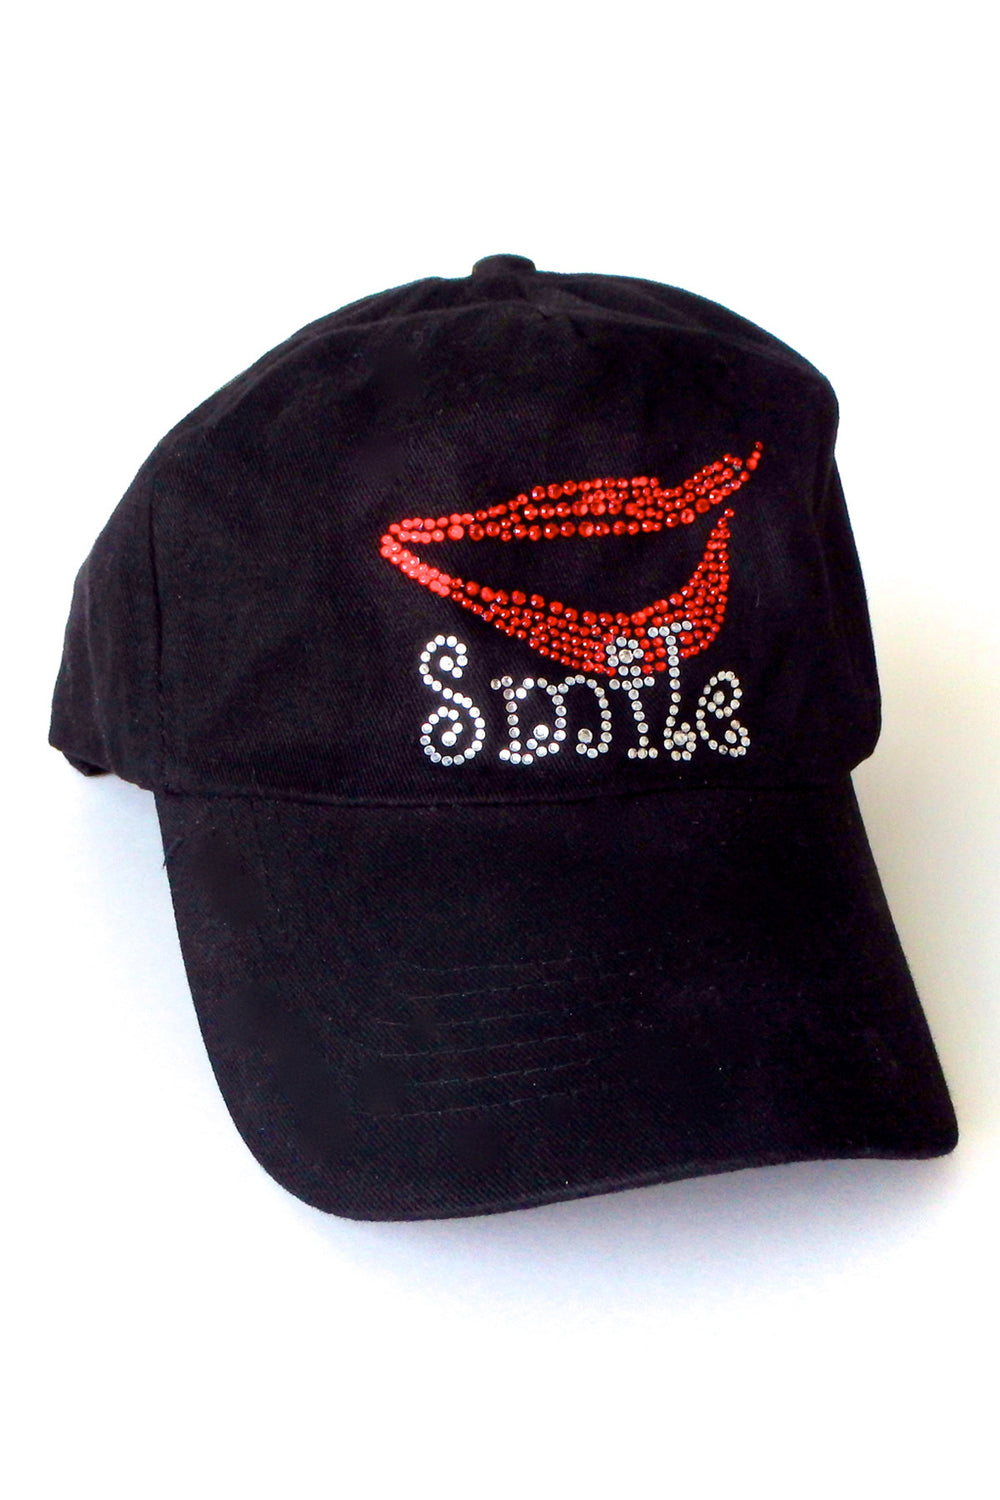 Smile Bling Cap - Where Fashion Meets Happiness!